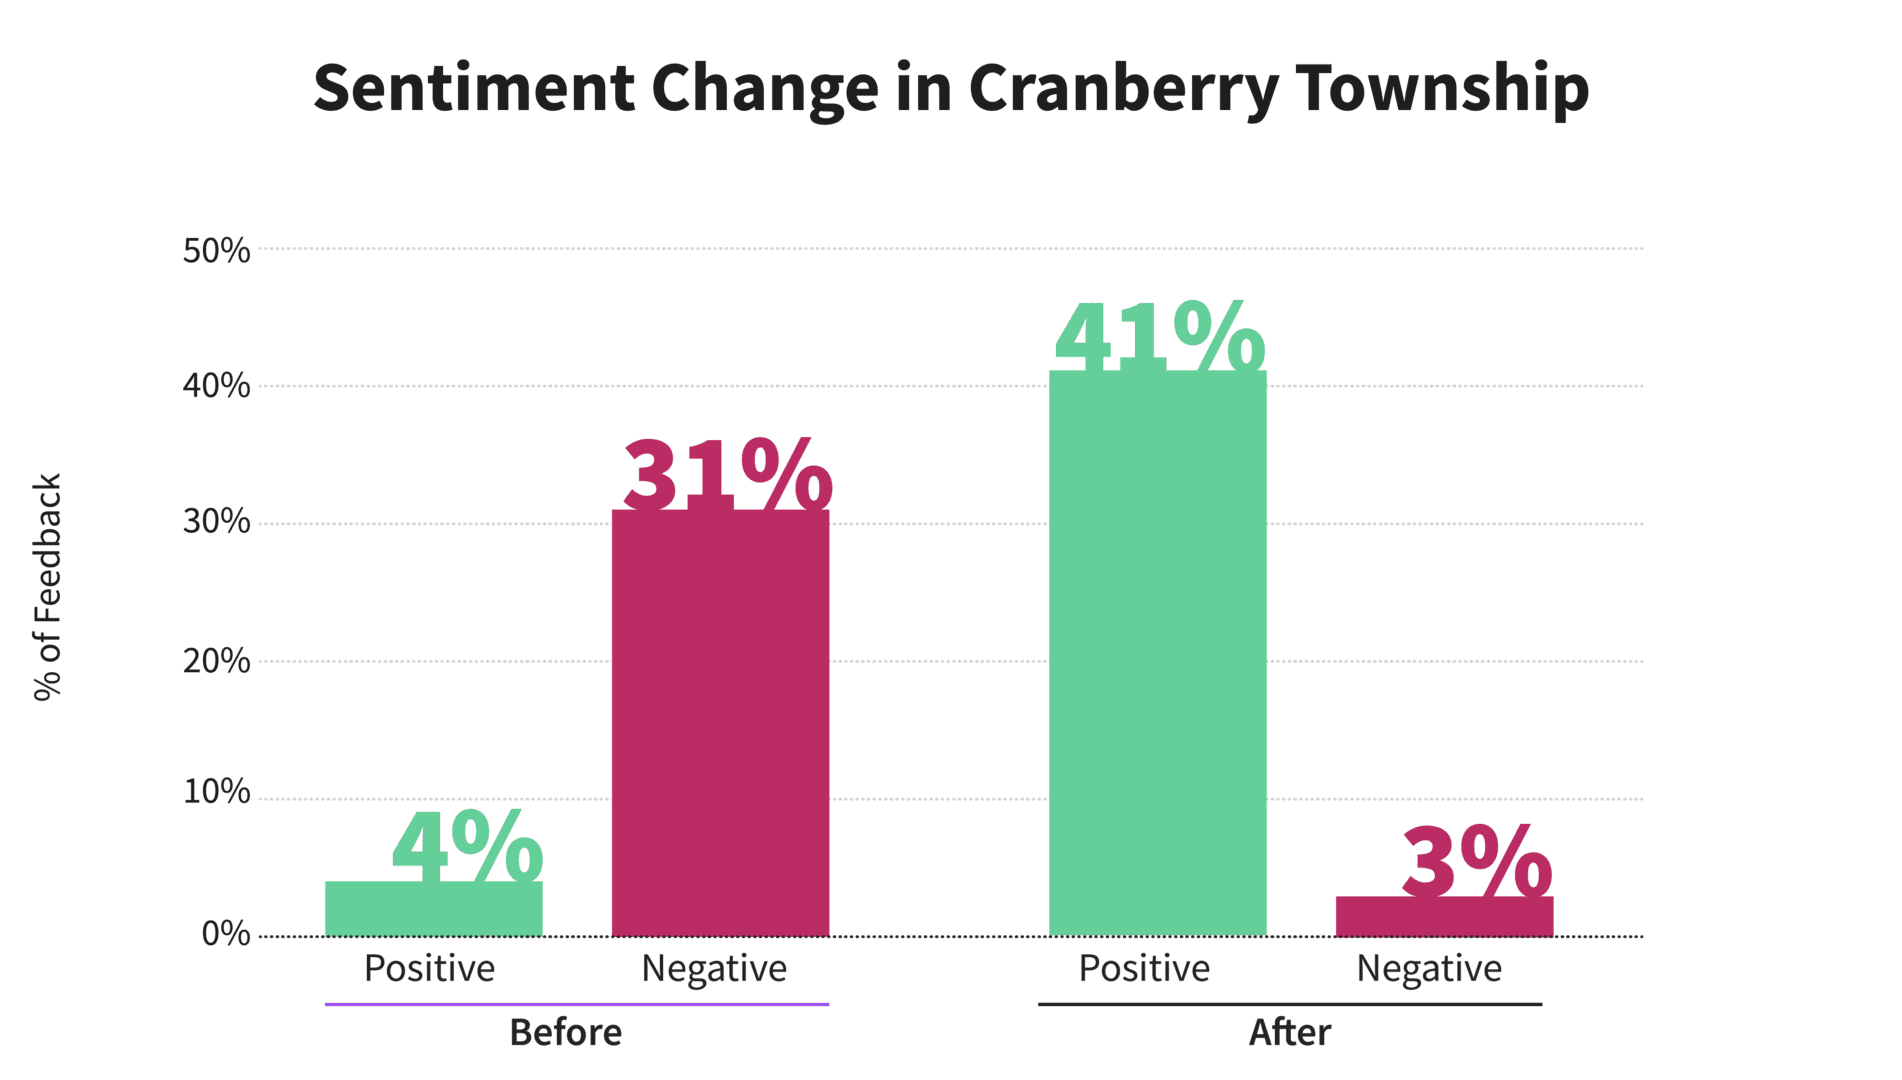 Sentiment change in Cranberry Township